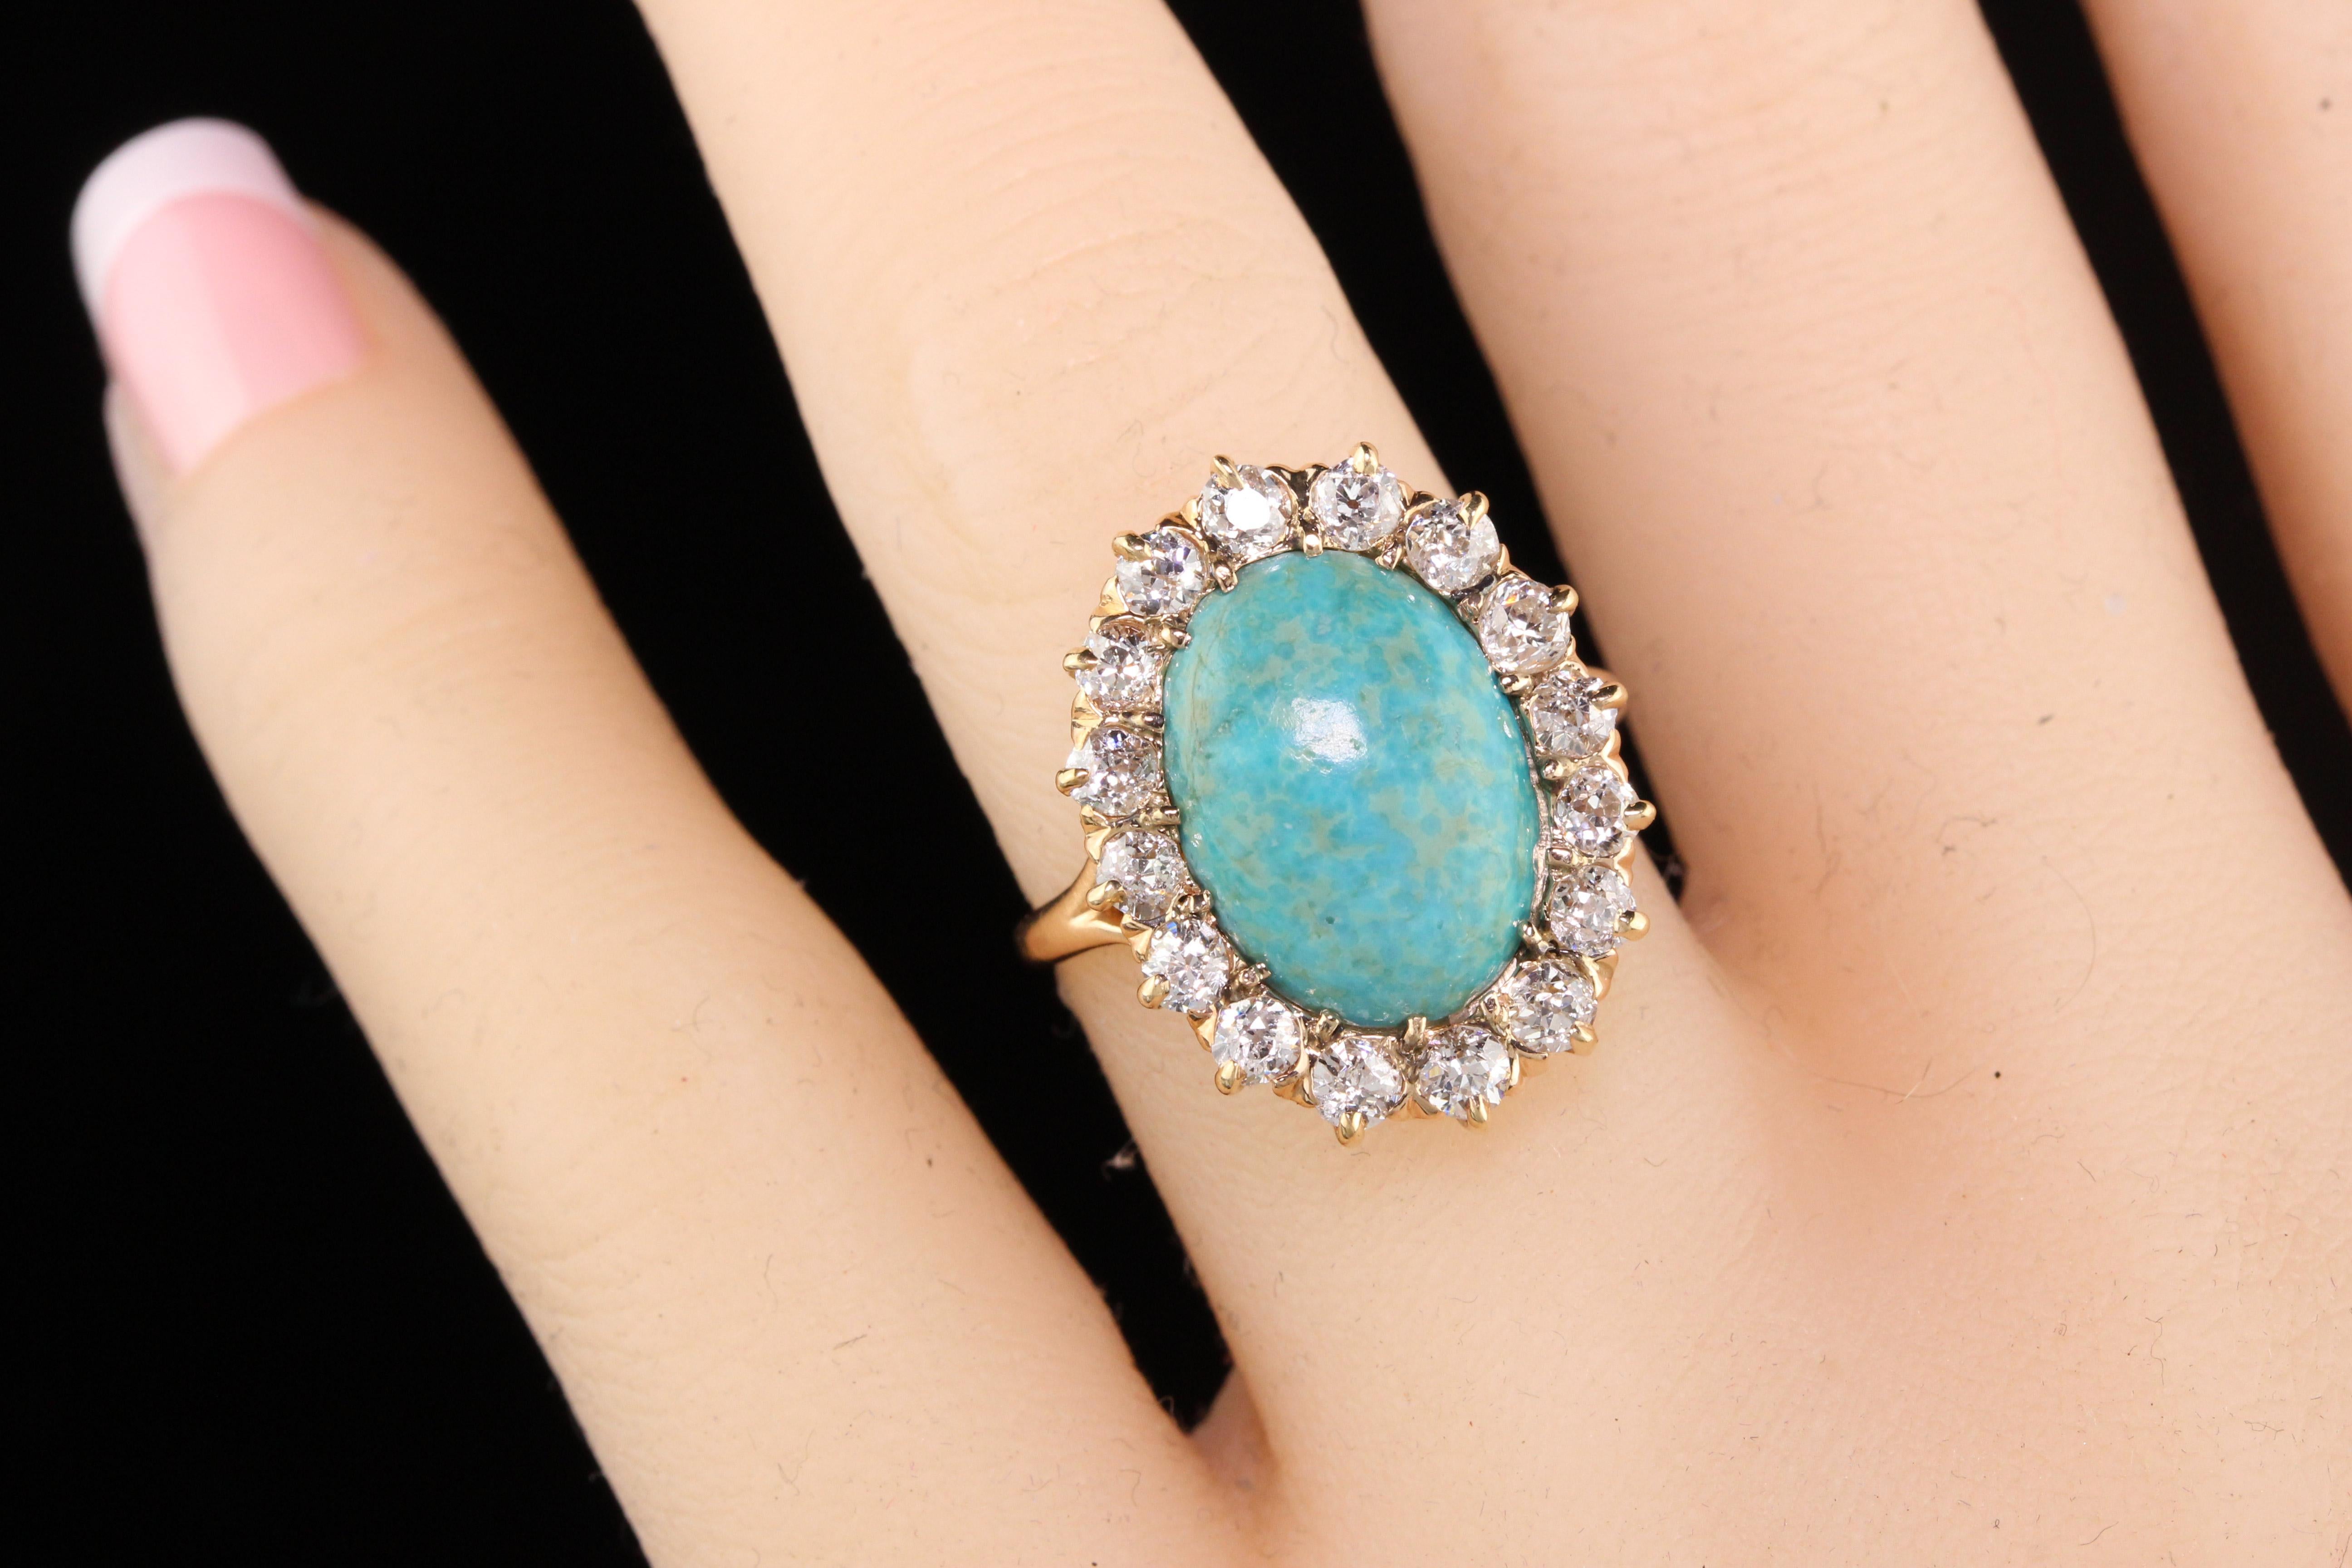 Antique Victorian 14 Karat Yellow Gold Old Miner Cut Diamonds and Turquoise Ring 1